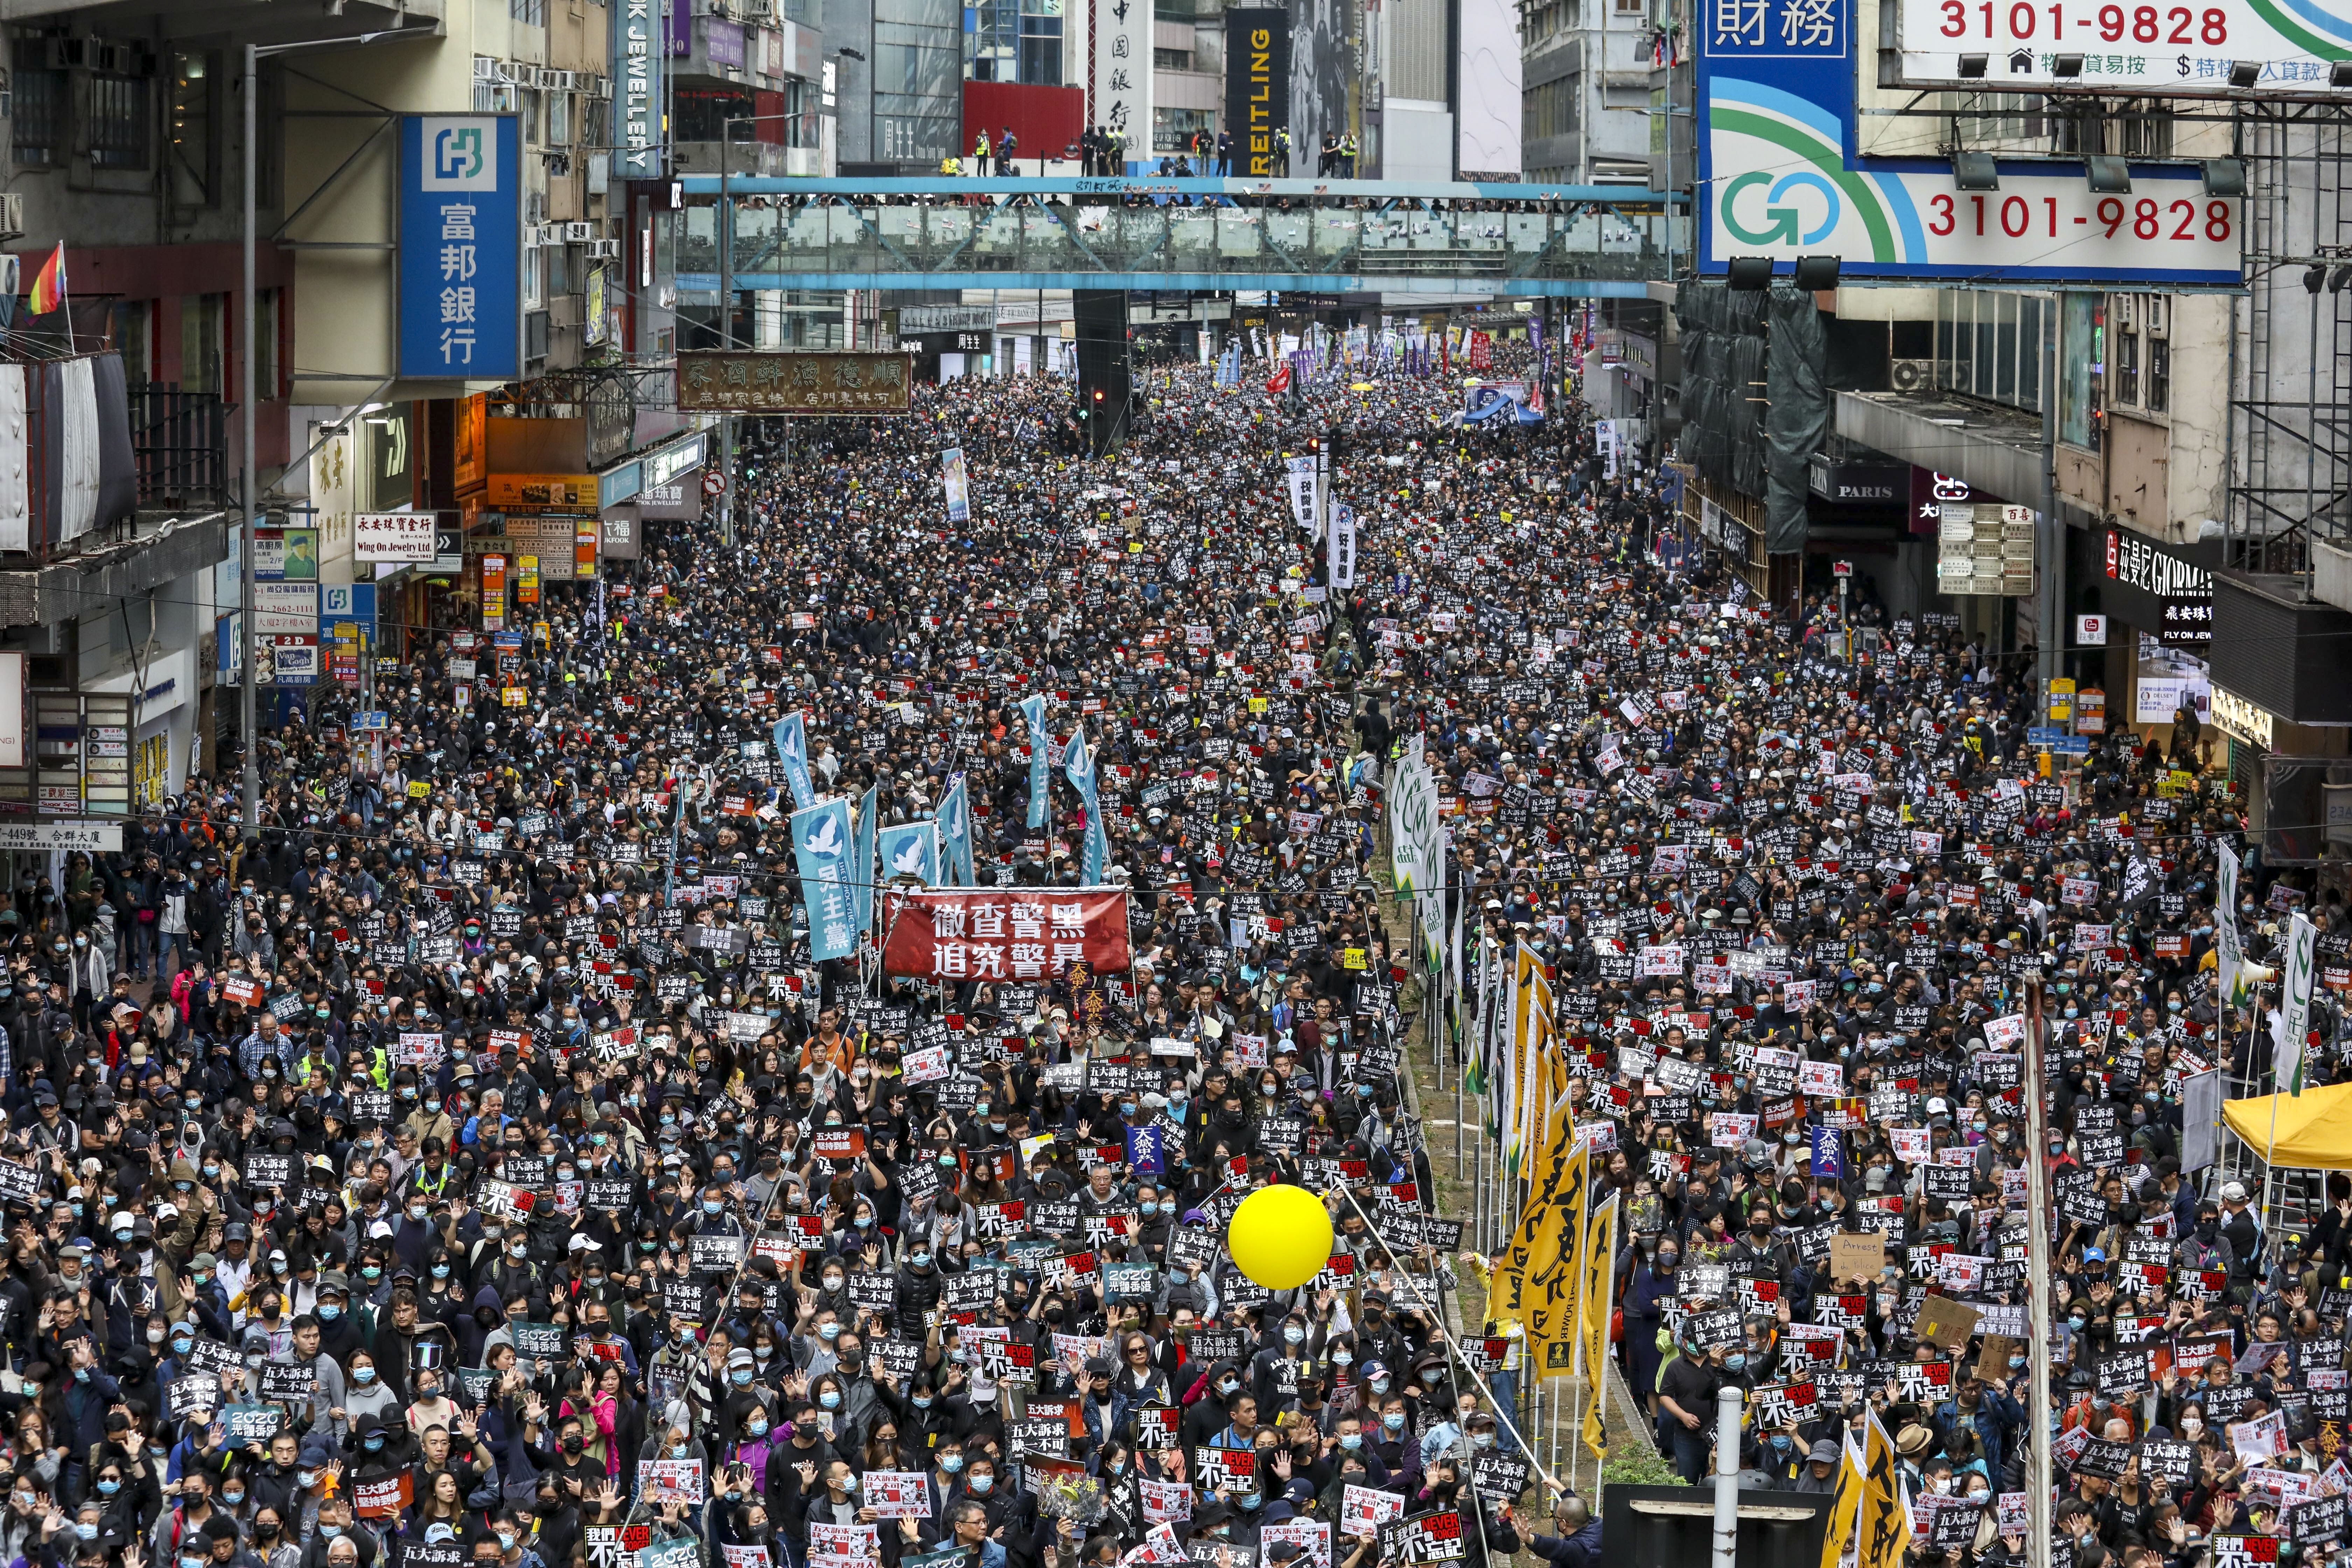 Anti-government protesters gather for a New Year’s Day march organised by the Civil Human Rights Front. Photo: Nora Tam